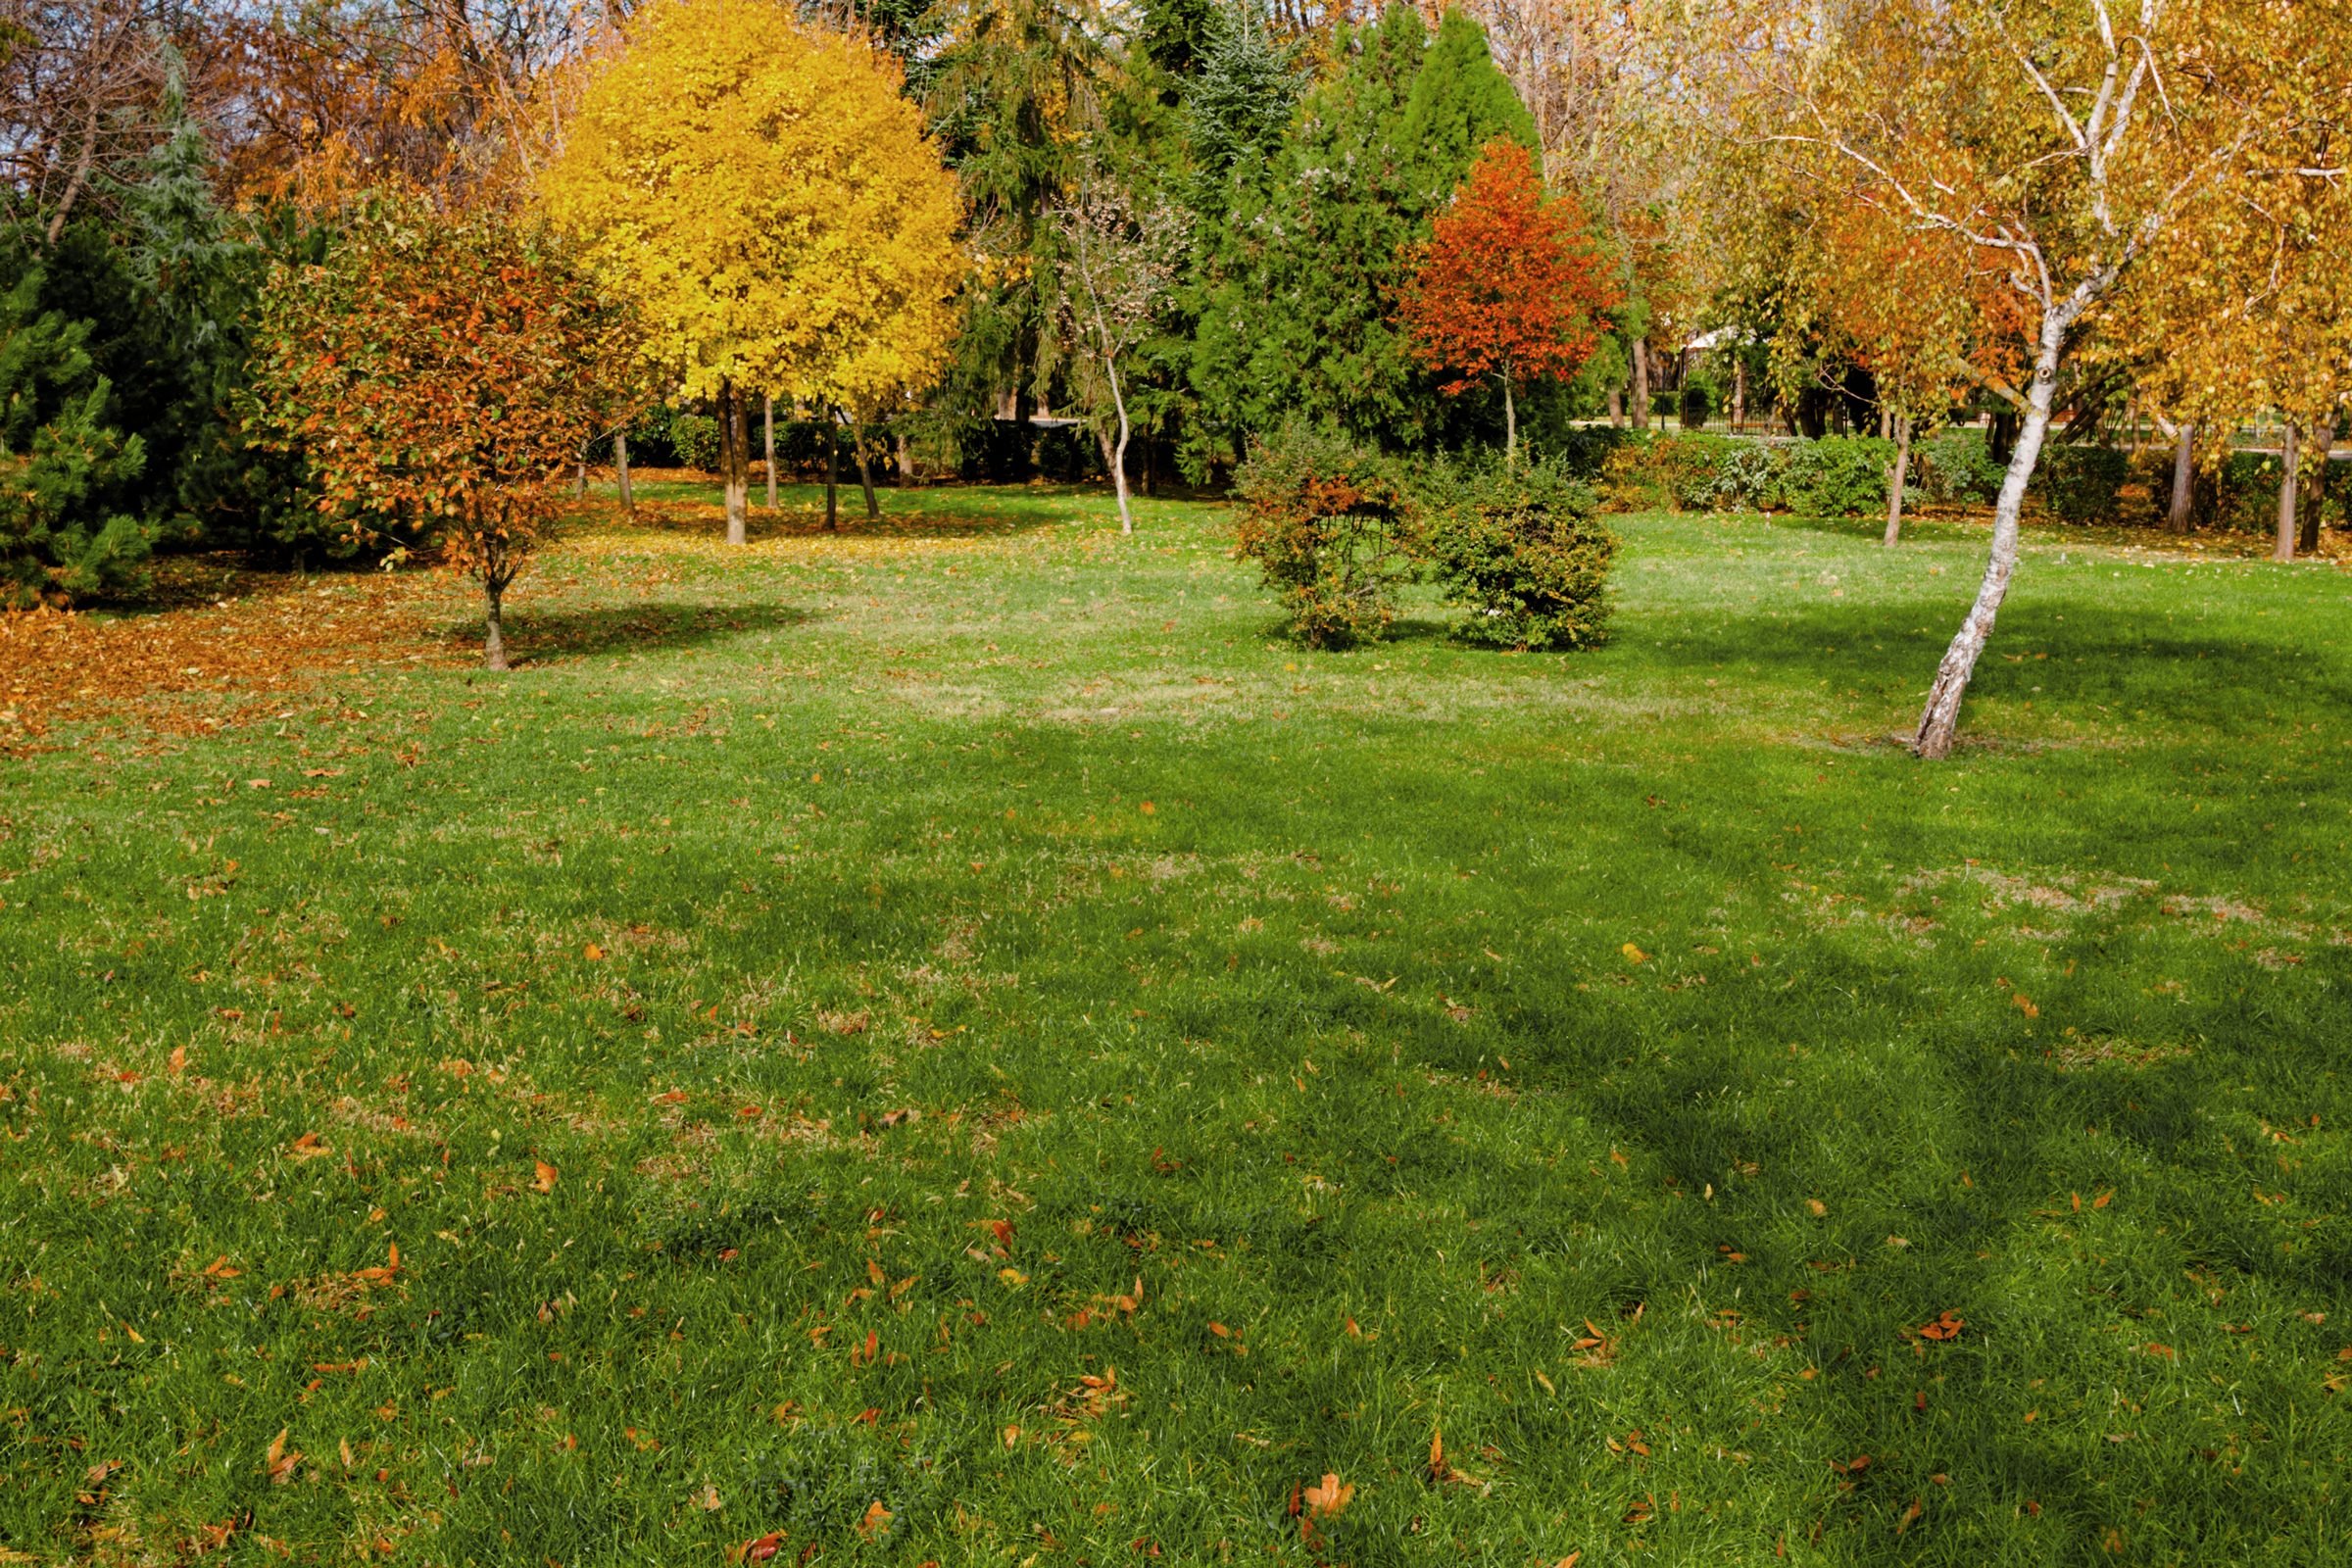 When Should I Stop Watering My Lawn in the Fall?